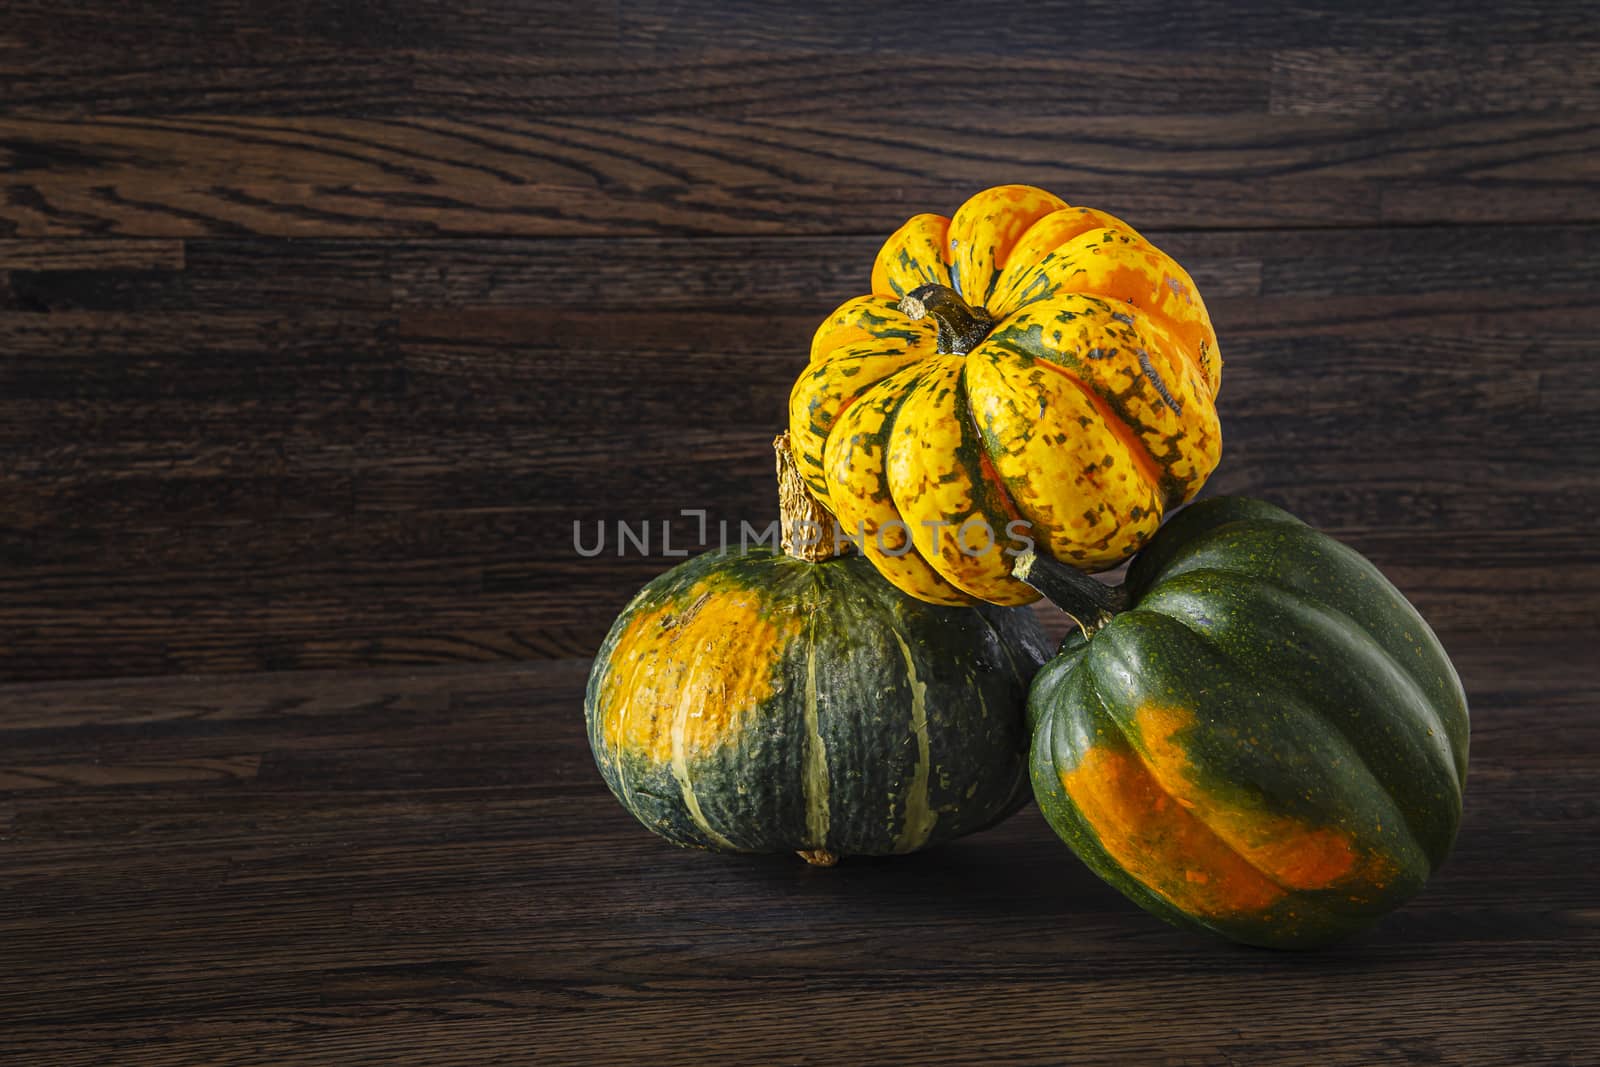 two Sweet Dumpling squash and one Kabocha squash in a stack against a wood background